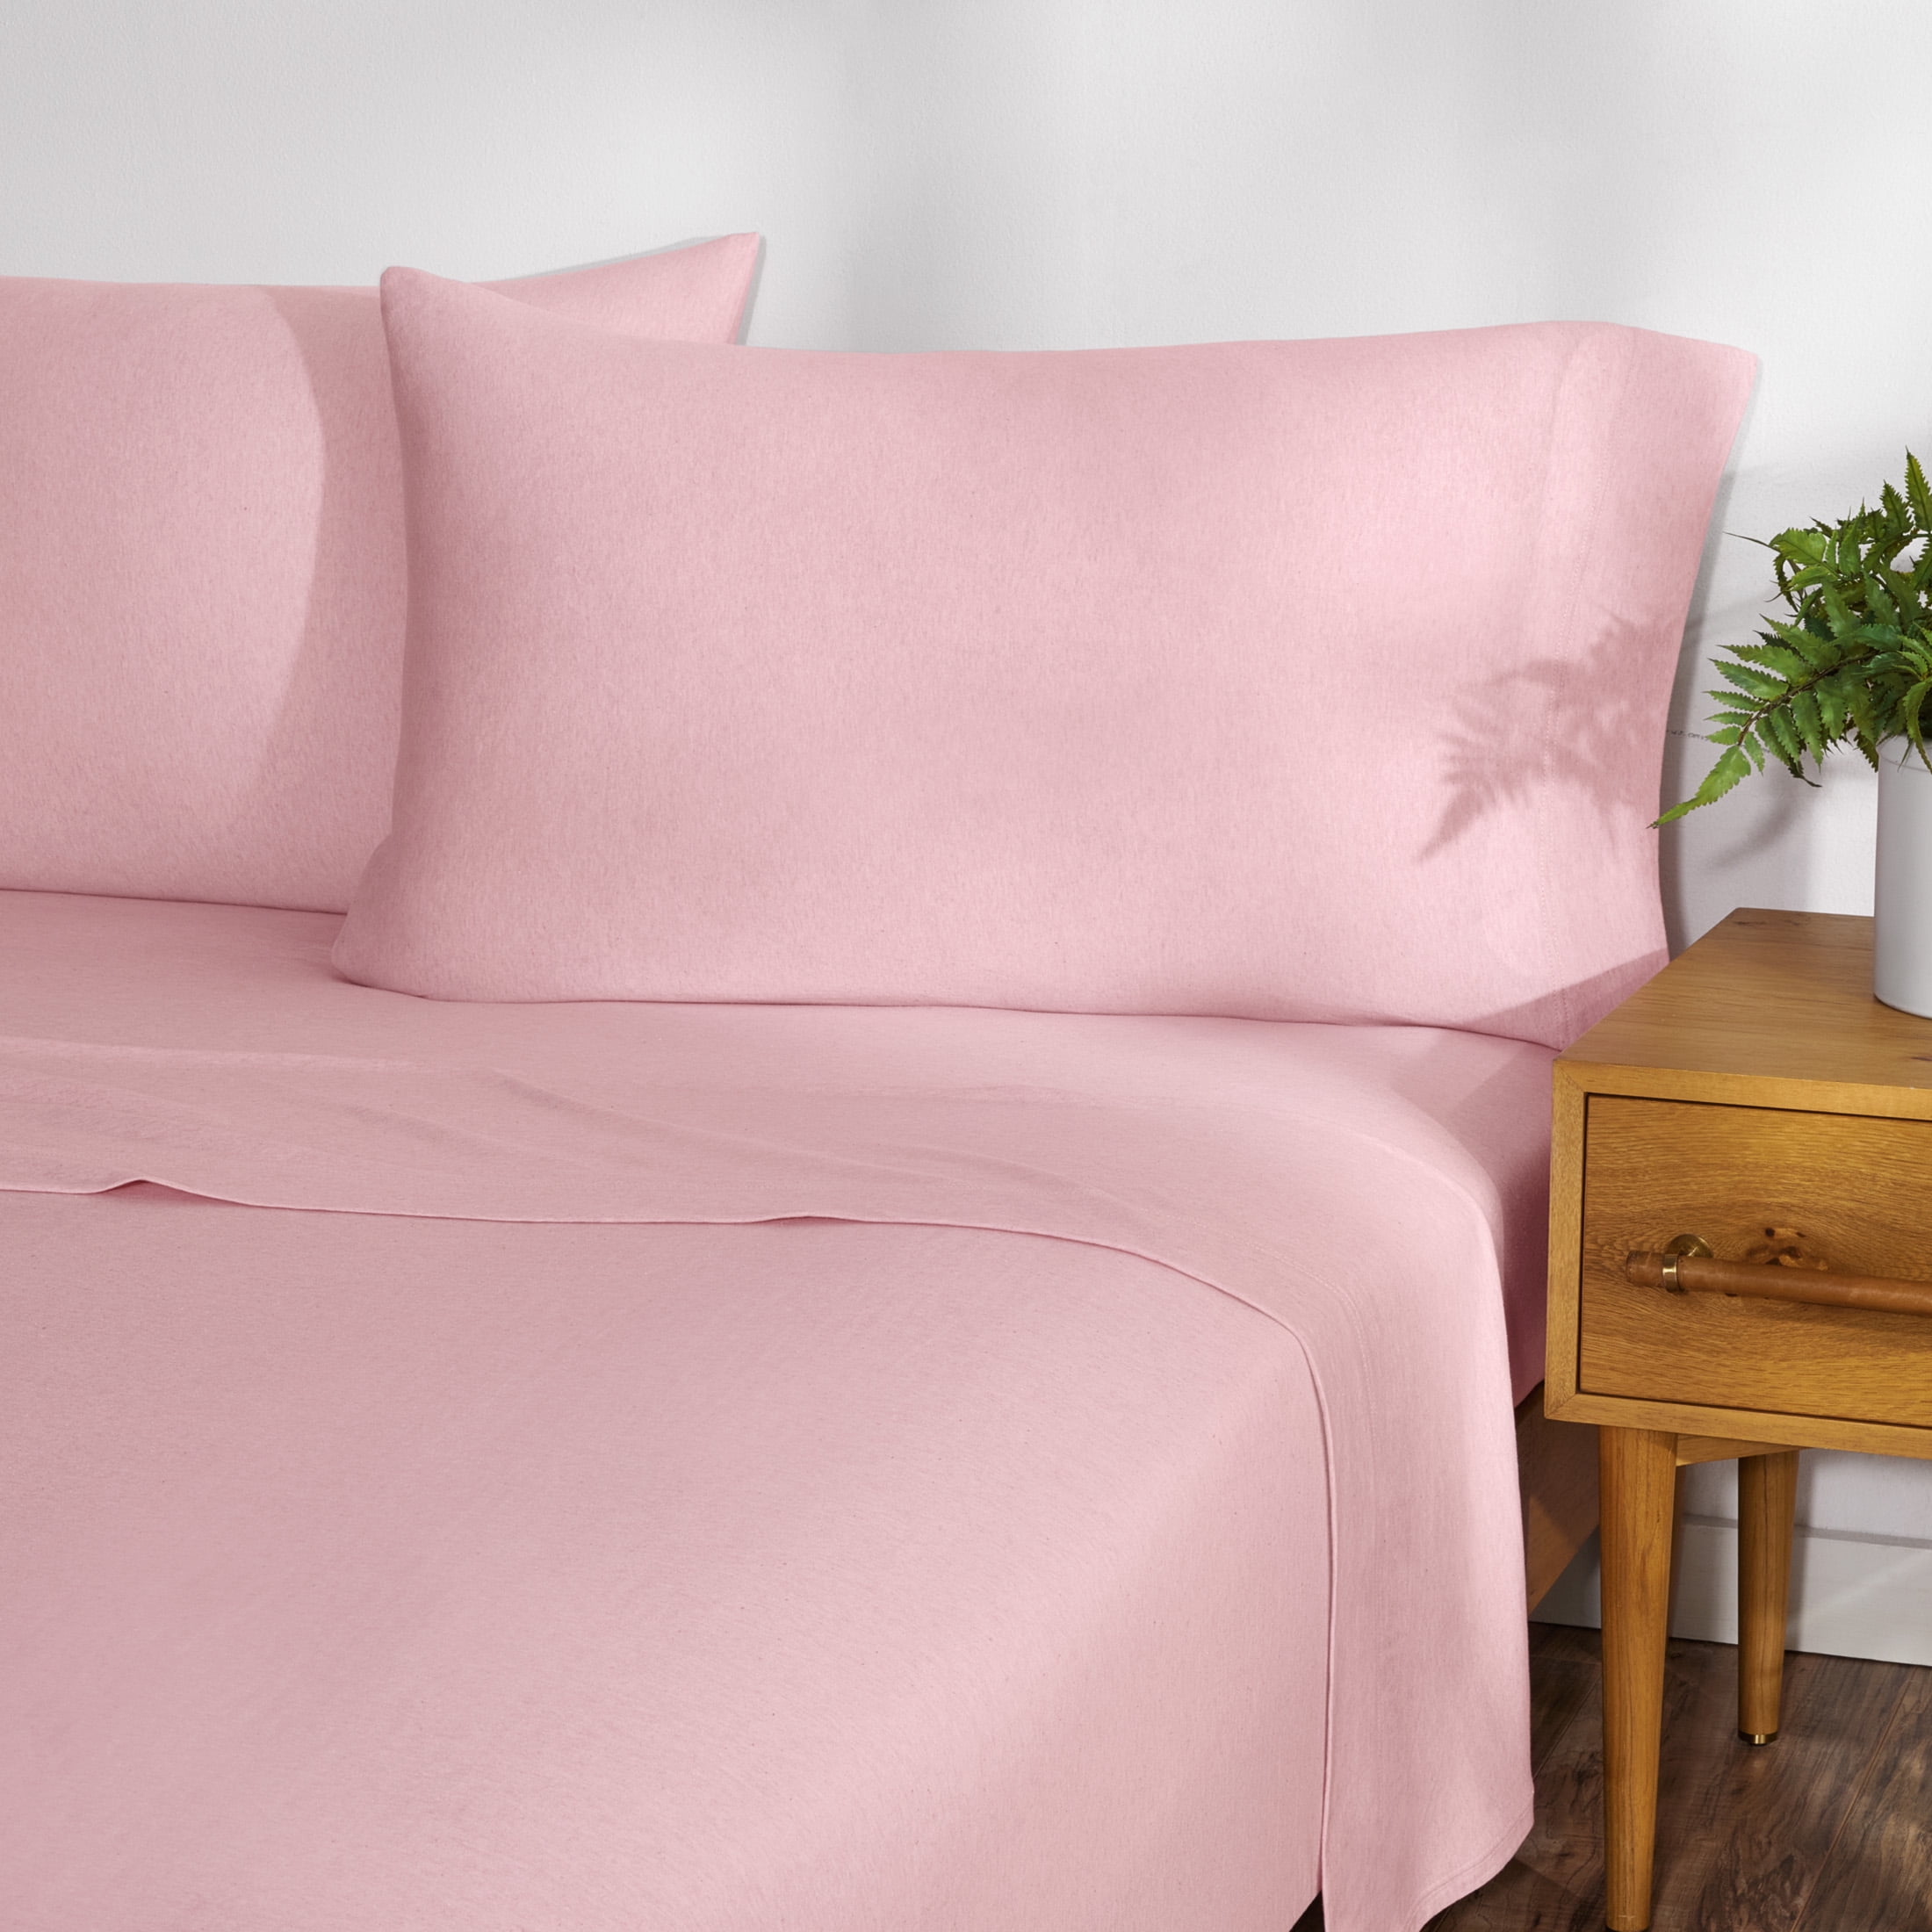 Pink Twin/XL Size Fitted Sheet,4 Way Stretch Fits Standard and Air